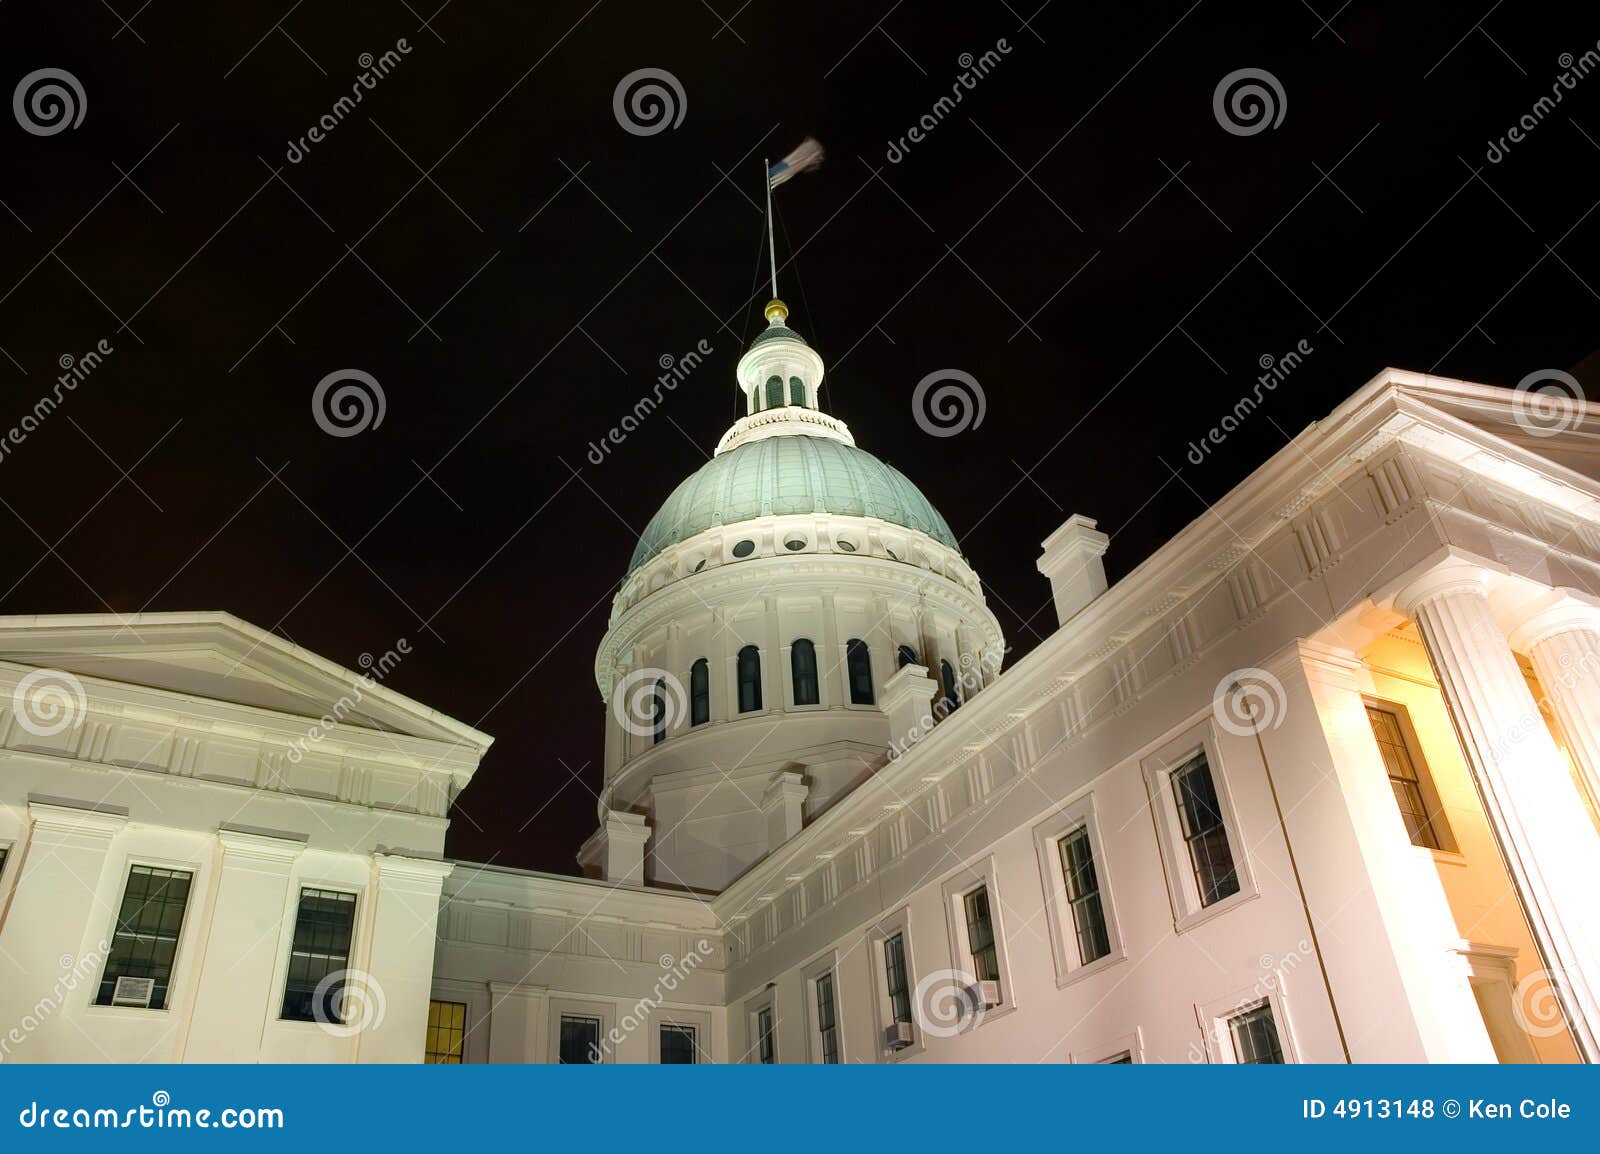 domed building at night